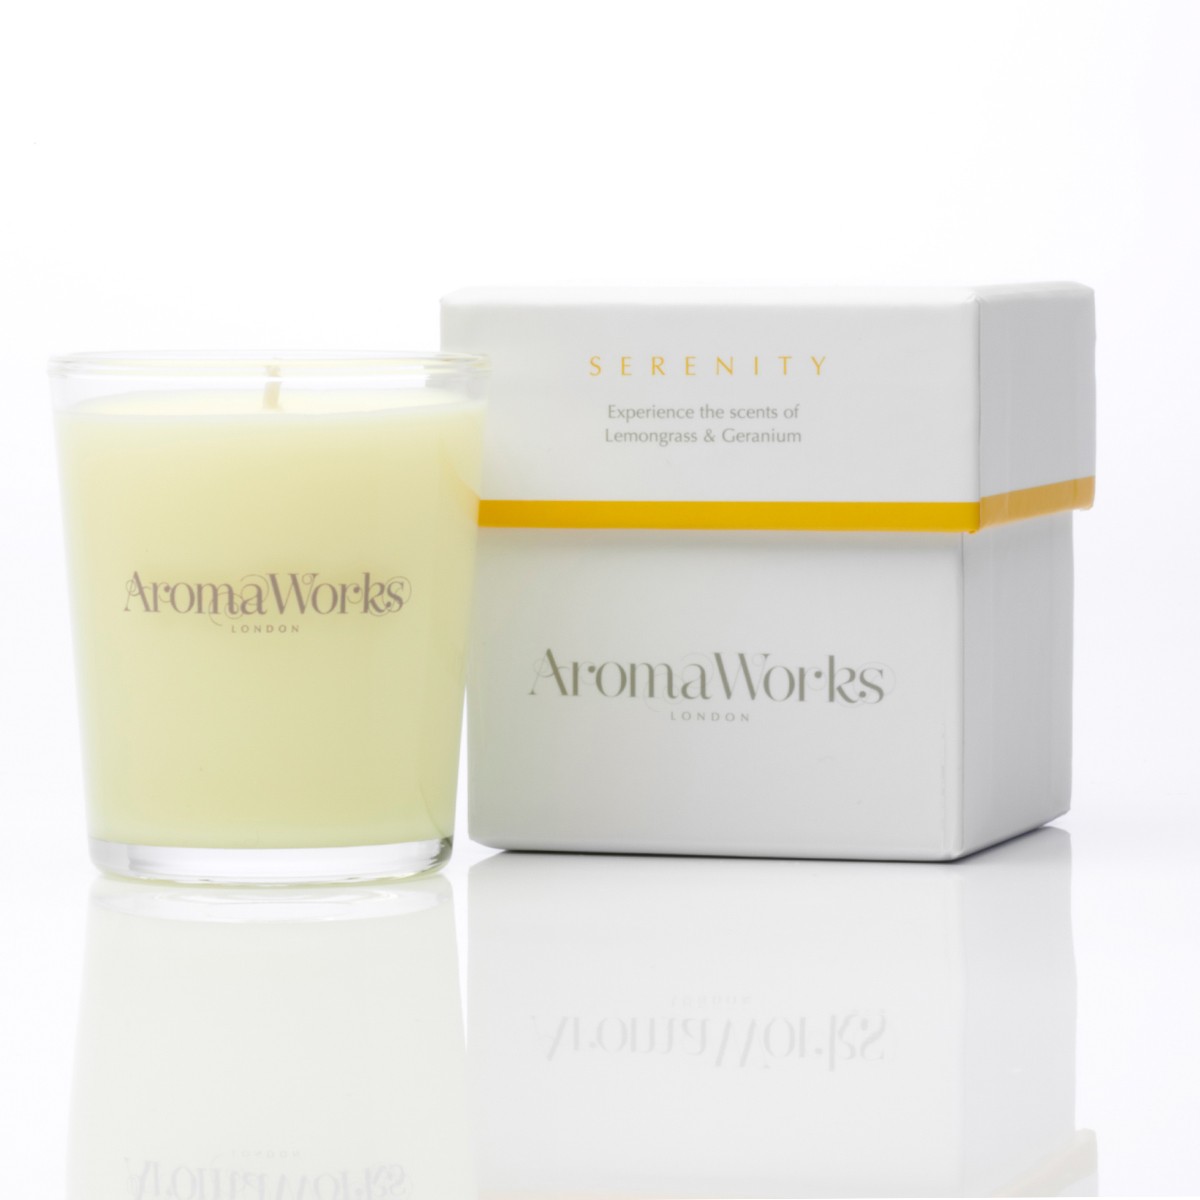 Aromaworks Serenity Candle 10 cl 